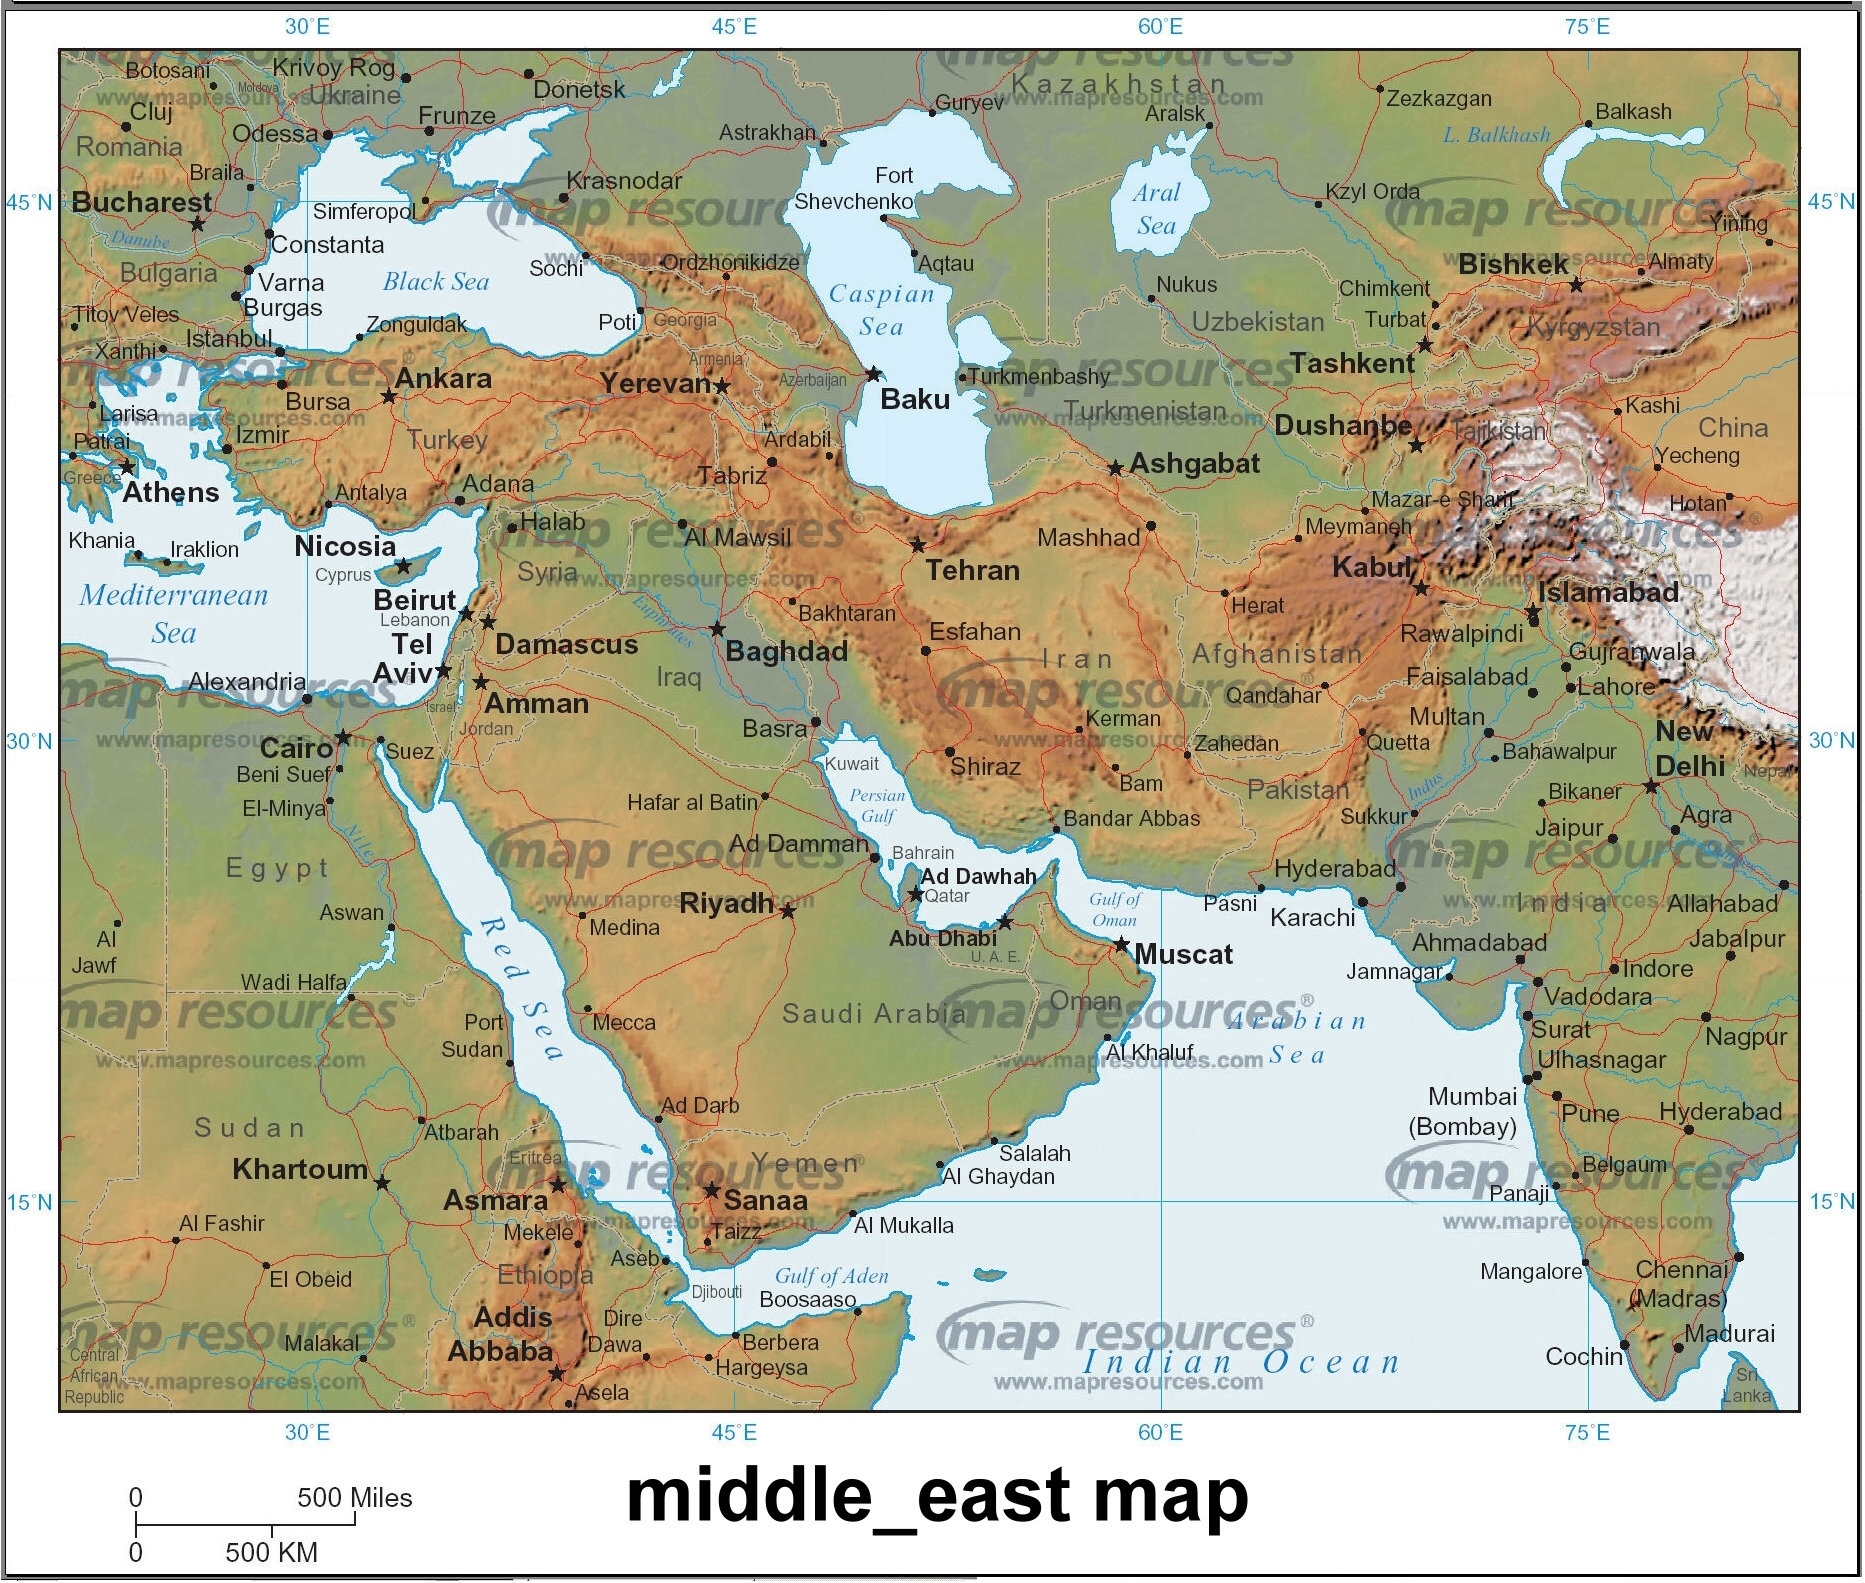 middle east map google: -website-map-middle-